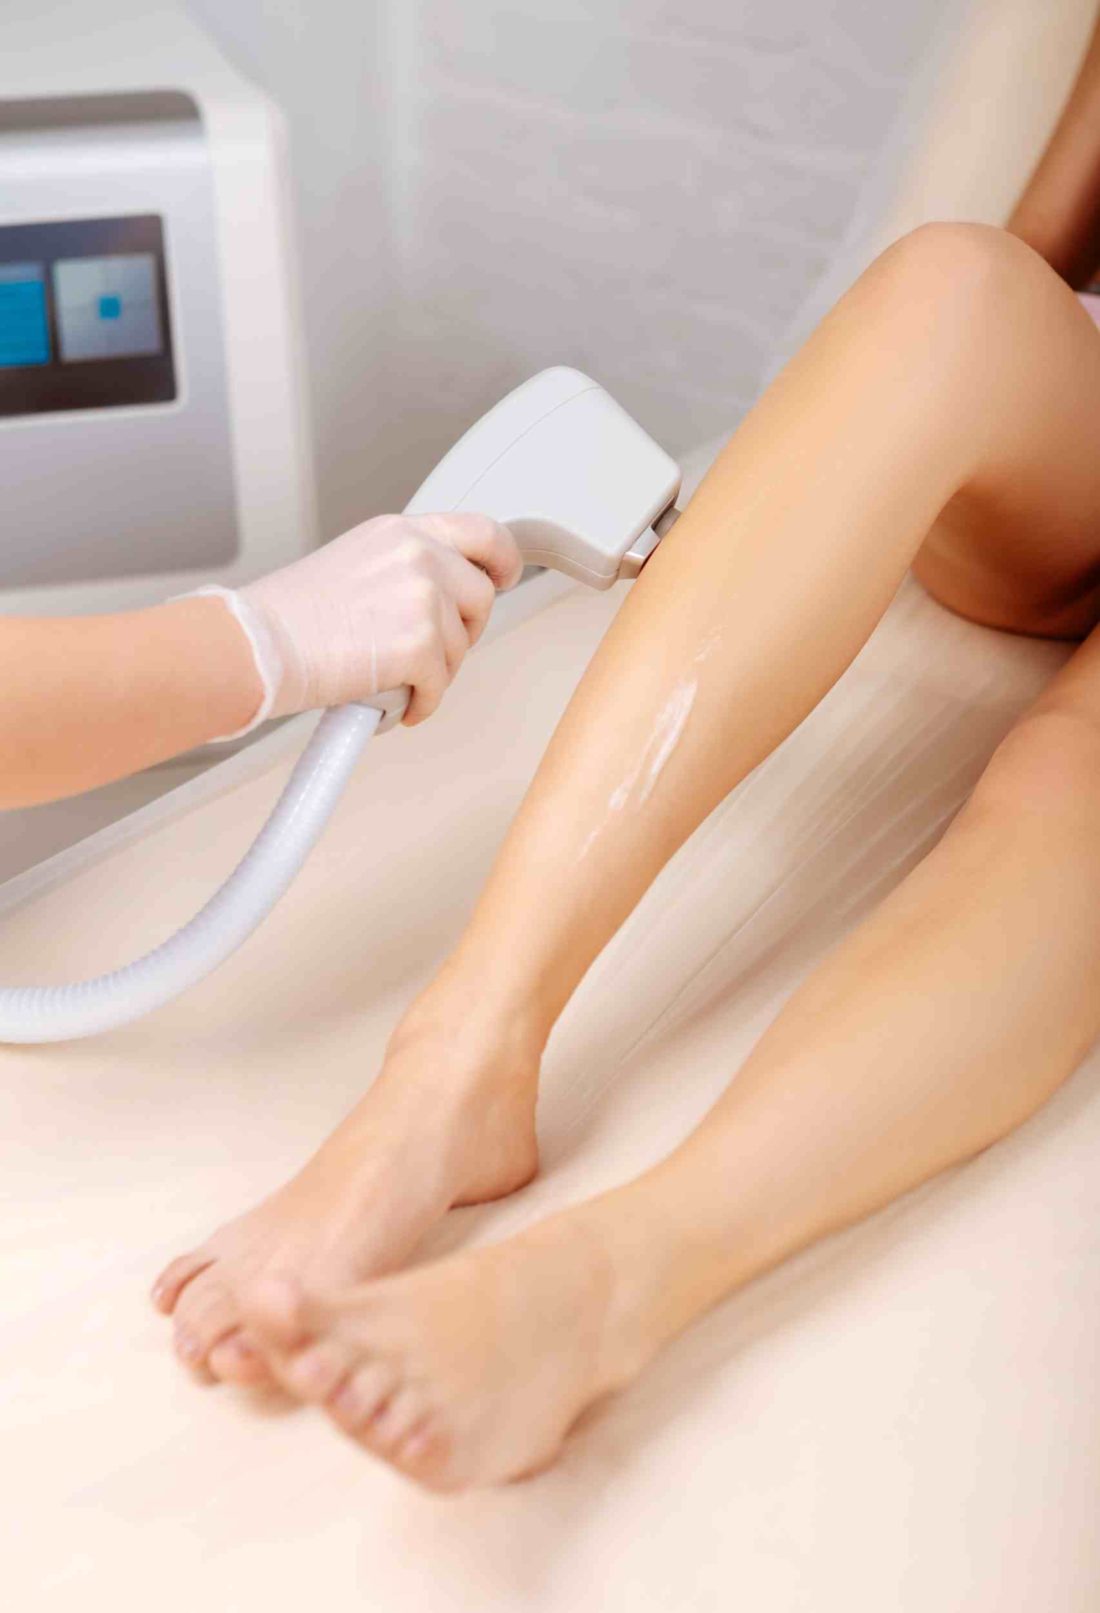 Preparation Guide: Important Facts About Laser Hair Removal